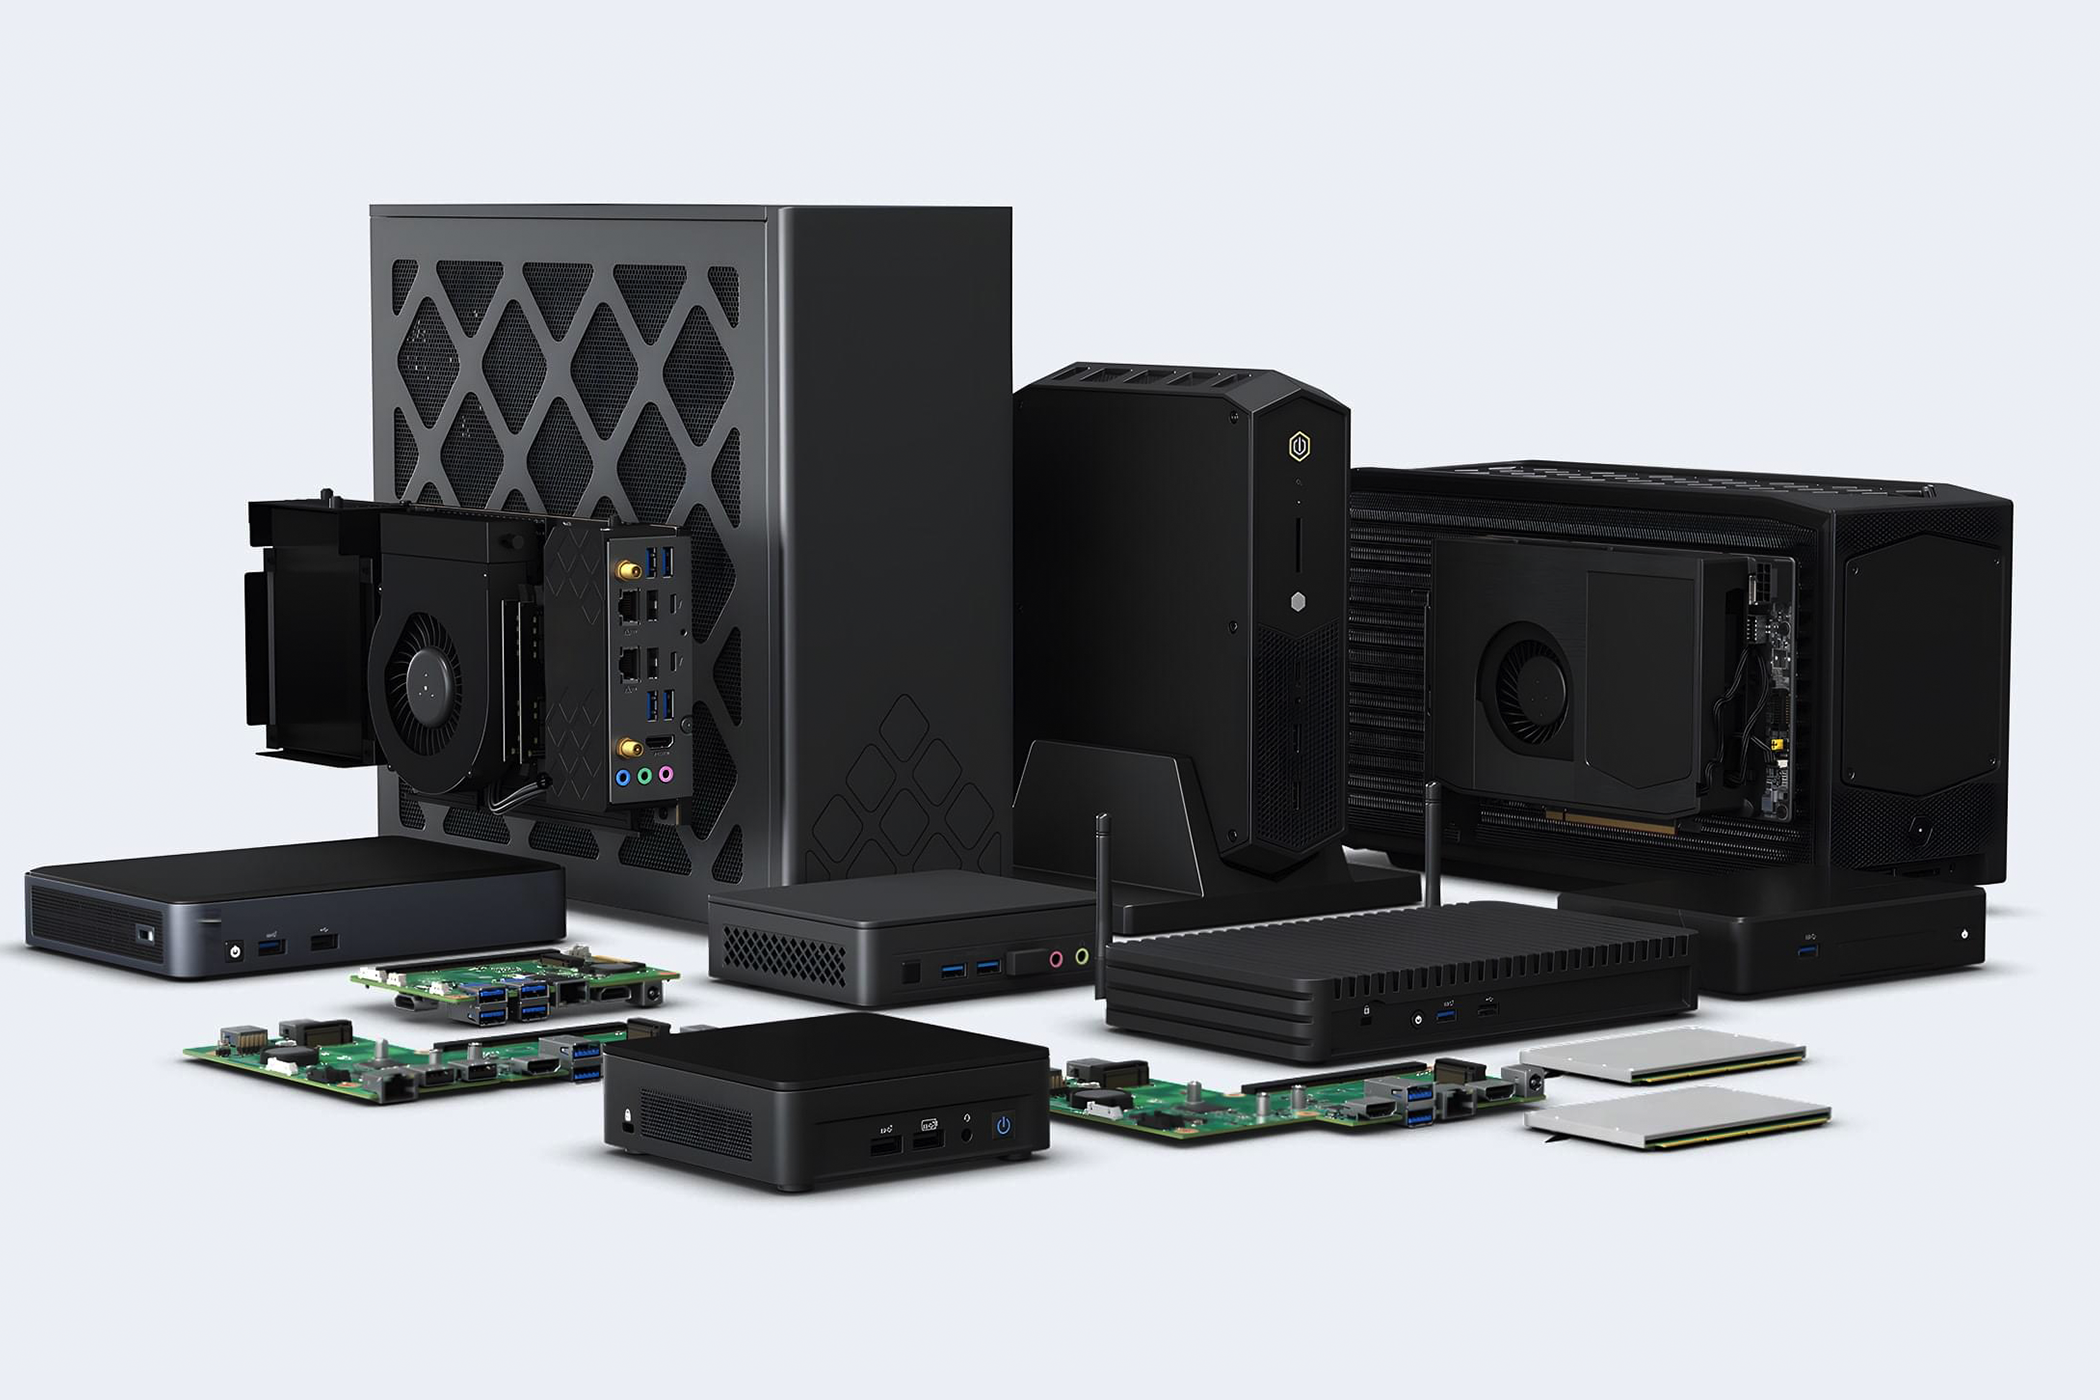 A lineup of 13th generation Intel NUC PCs, which are now sold and supported by ASUS.